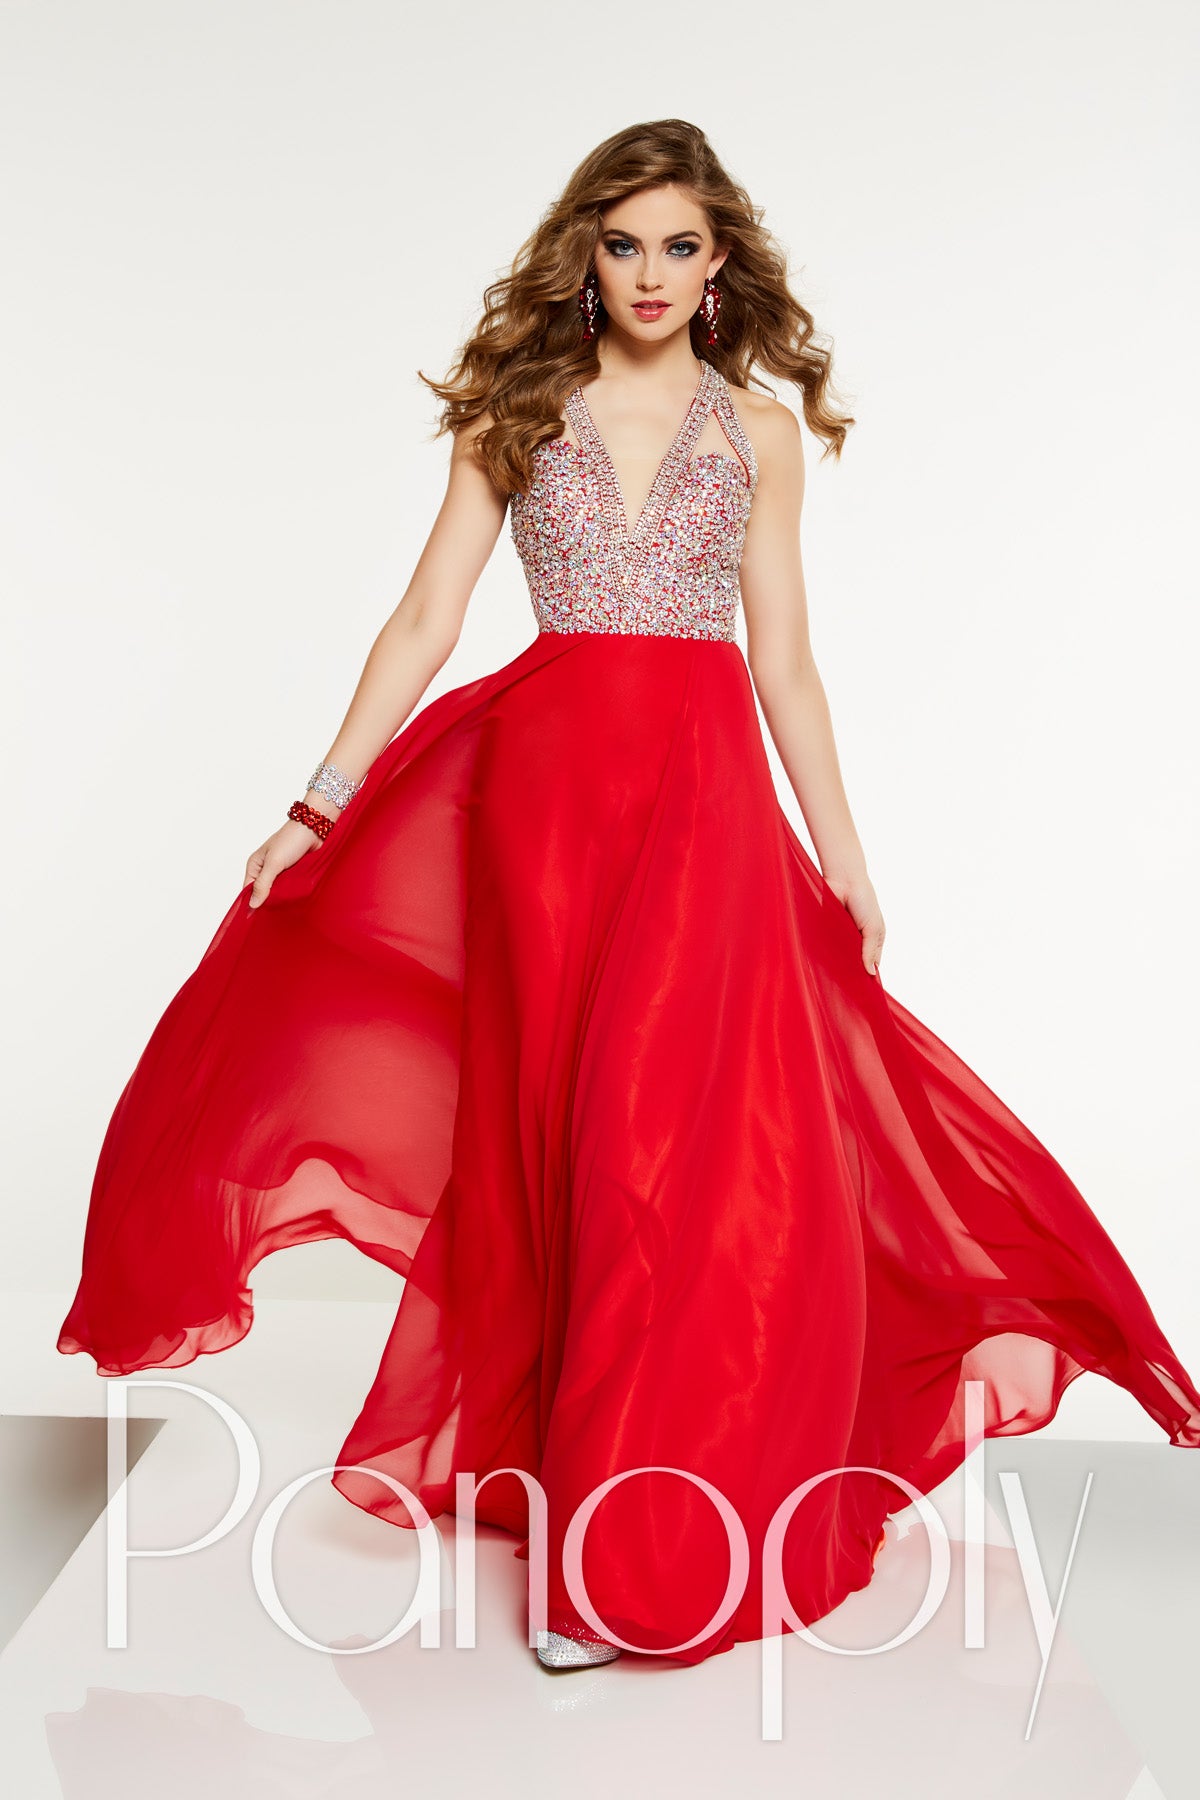 Panoply's Red Hot Gowns